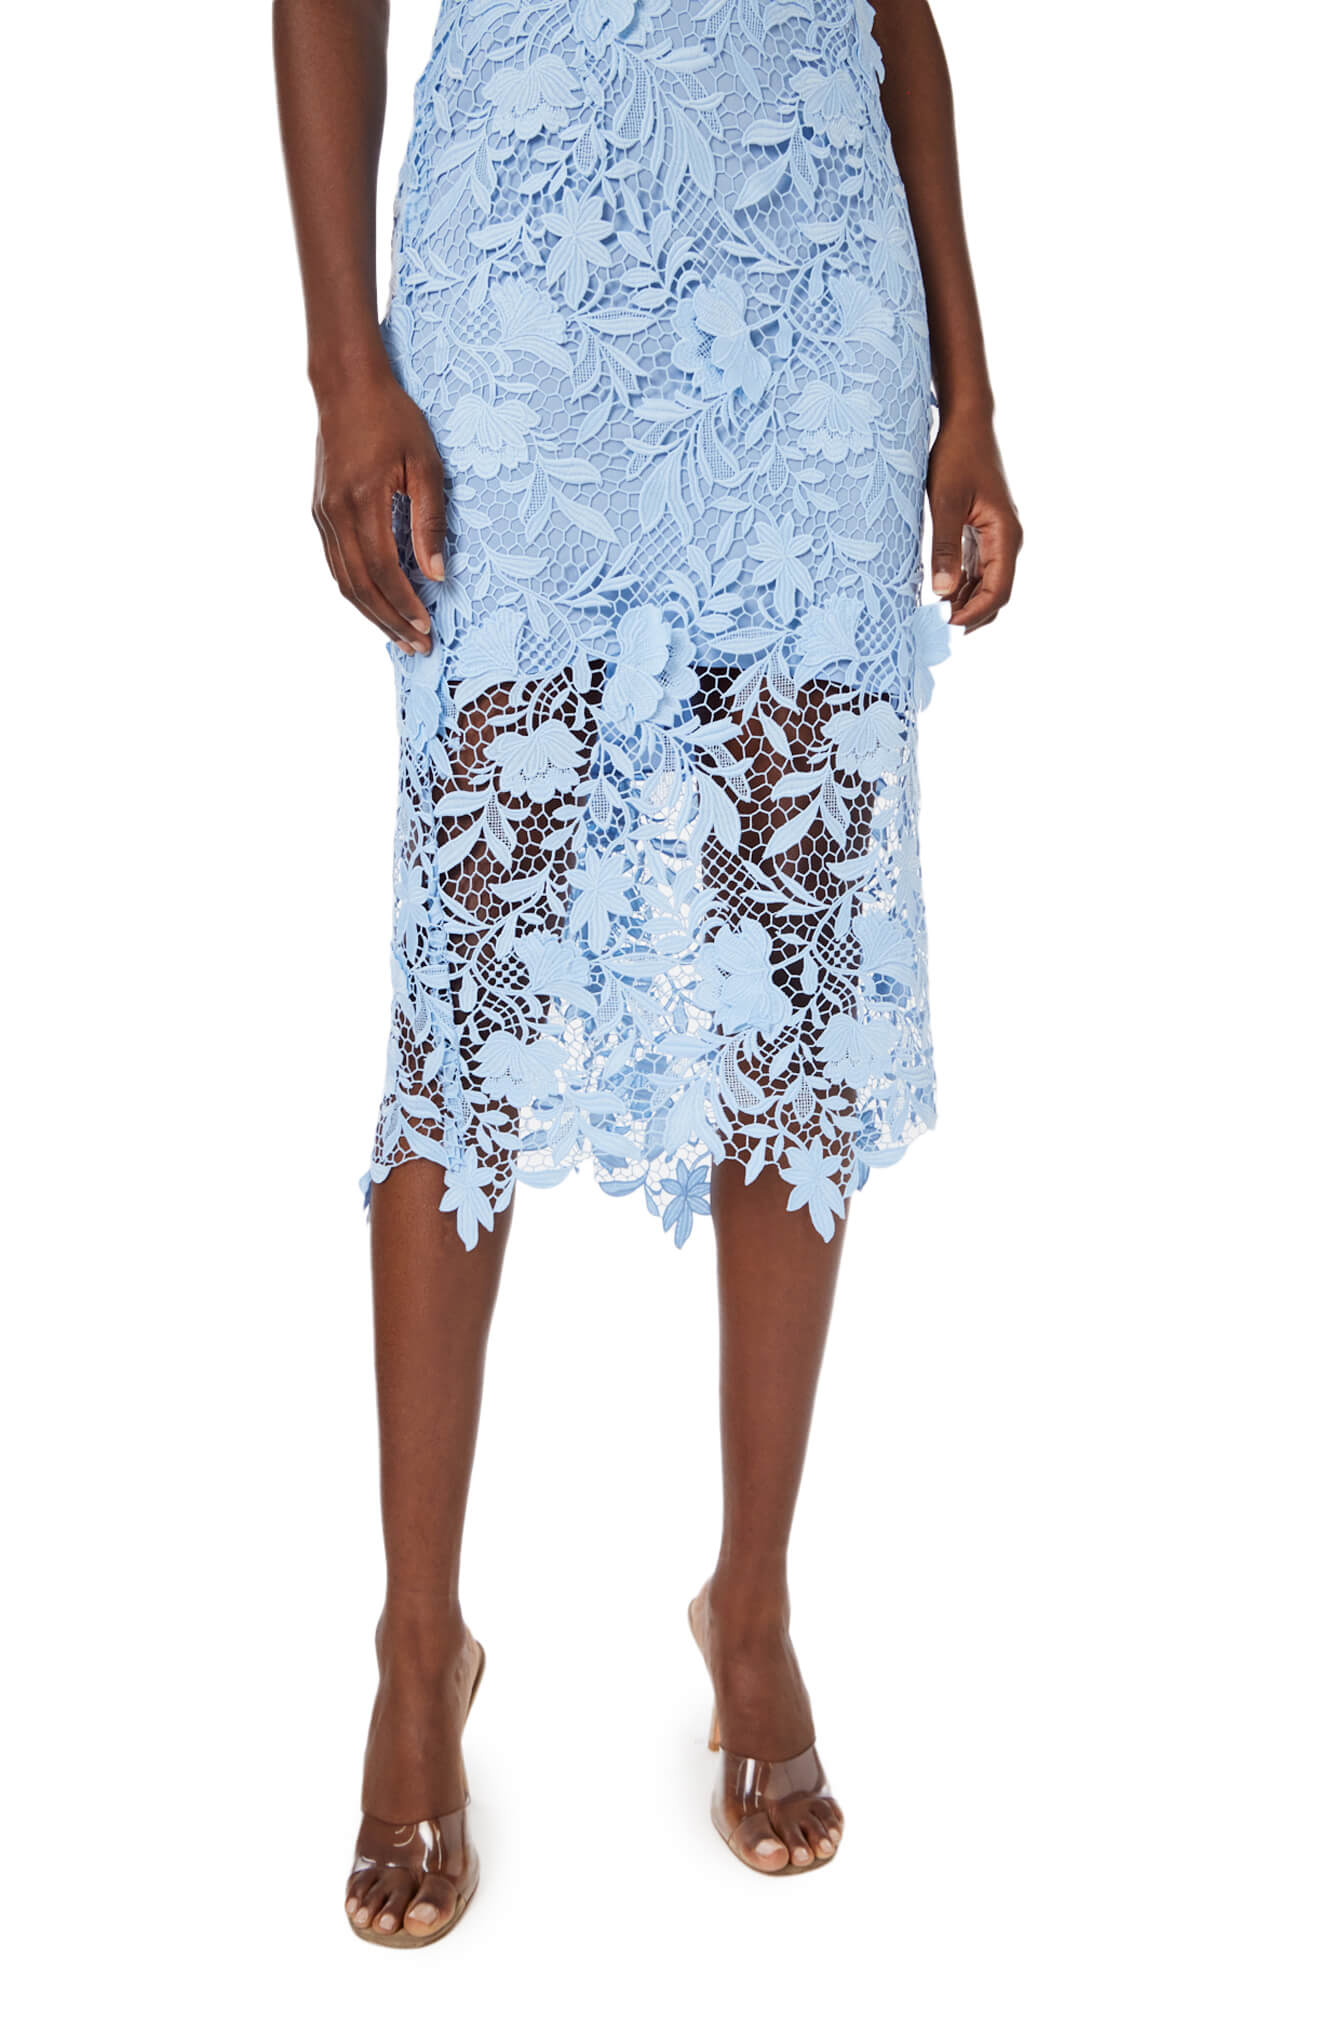 Monique Lhuillier Spring 2024 midi dress in pale blue lace with scalloped edging details.